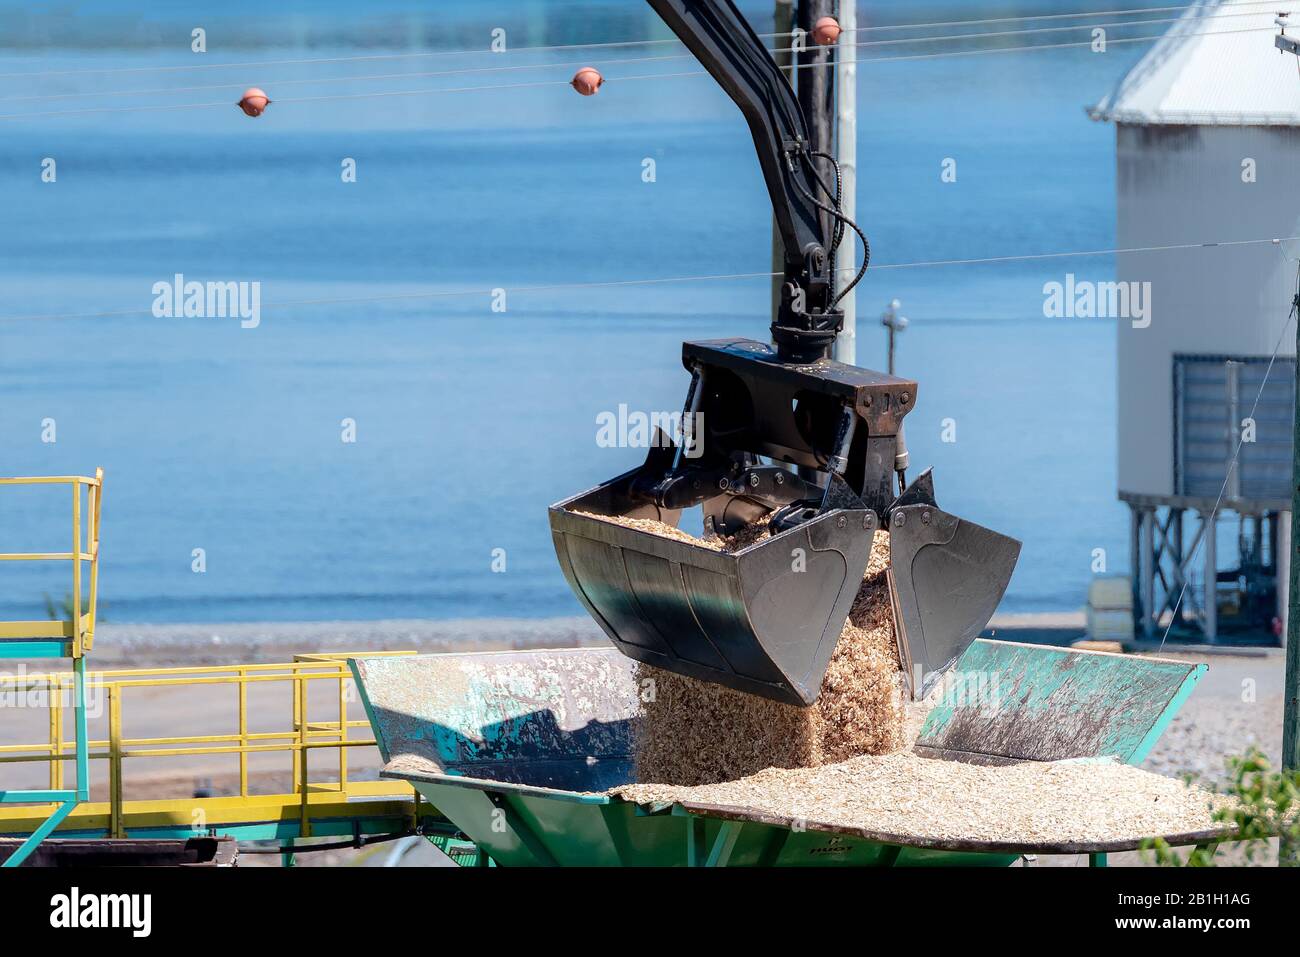 A large clamshell bucket scoop dropping a load of sawdust into hopper. From the hopper, the sawdust will proceed into a pulp mill. Stock Photo